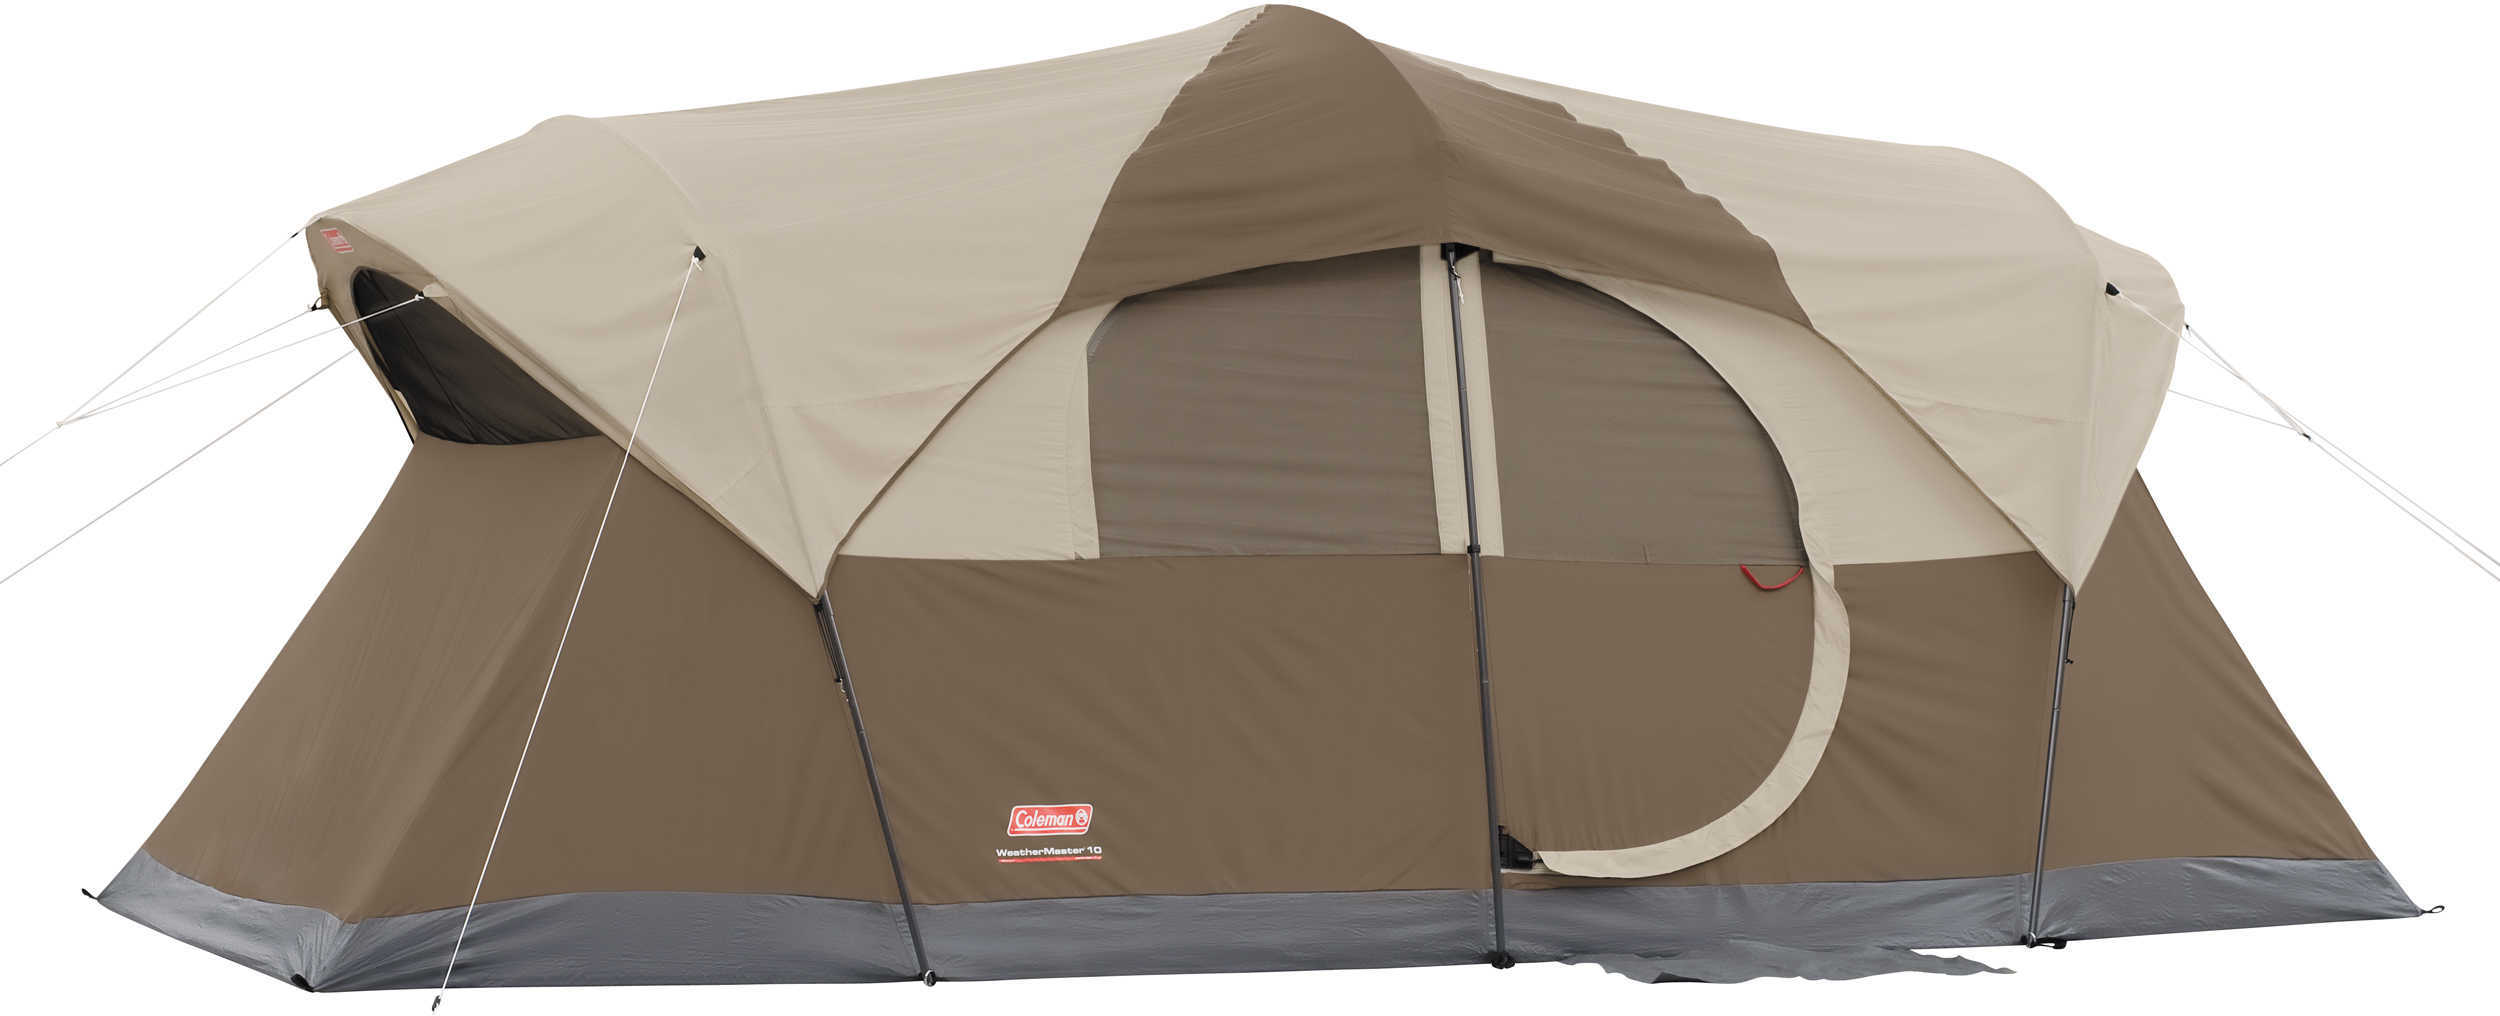 Coleman Weathermaster 10 Person Tent 17 x 9 Md: 2000001598